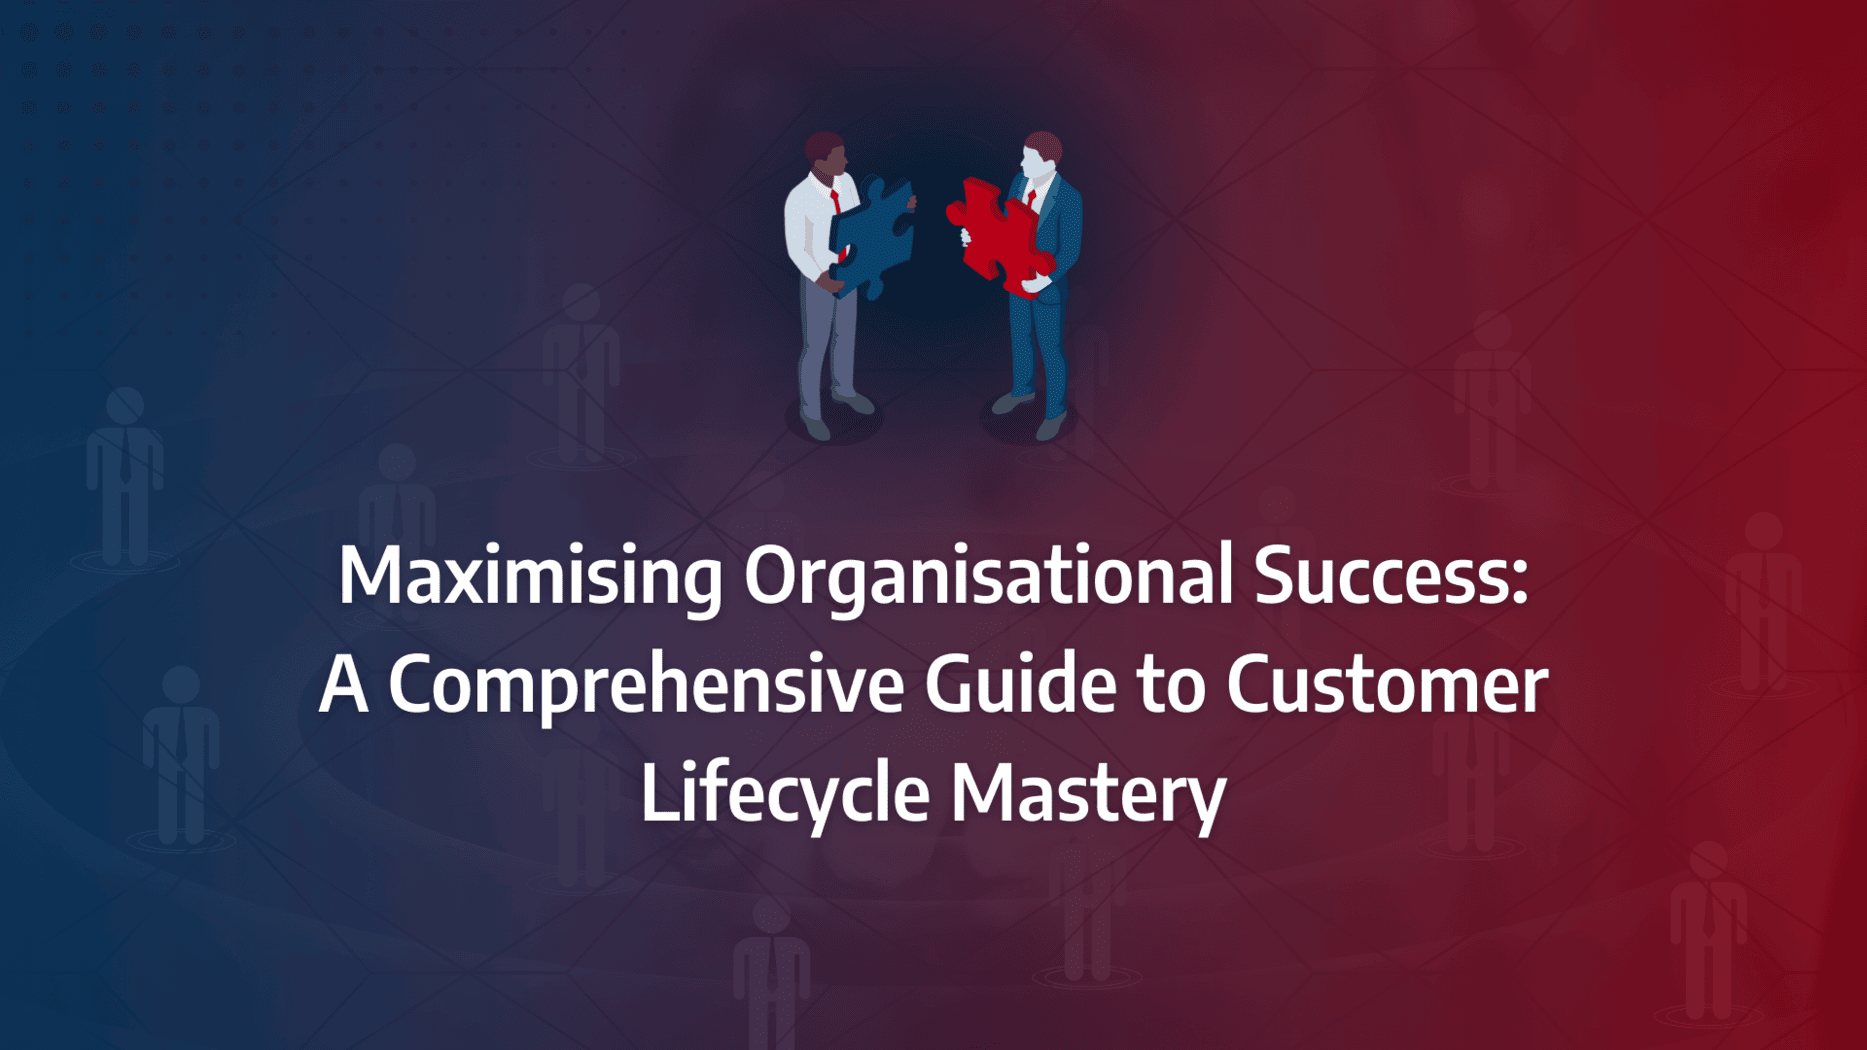 Customer lifecycle: strategically enhancing organisational success through comprehensive customer lifecycle mapping, effective management, tailored journey analysis, and optimised lifecycle stage engagement.: strategy framework diagram for customer lifecycle stages, customer lifecycle journey, customer lifecycle management, customer lifecycle mapping